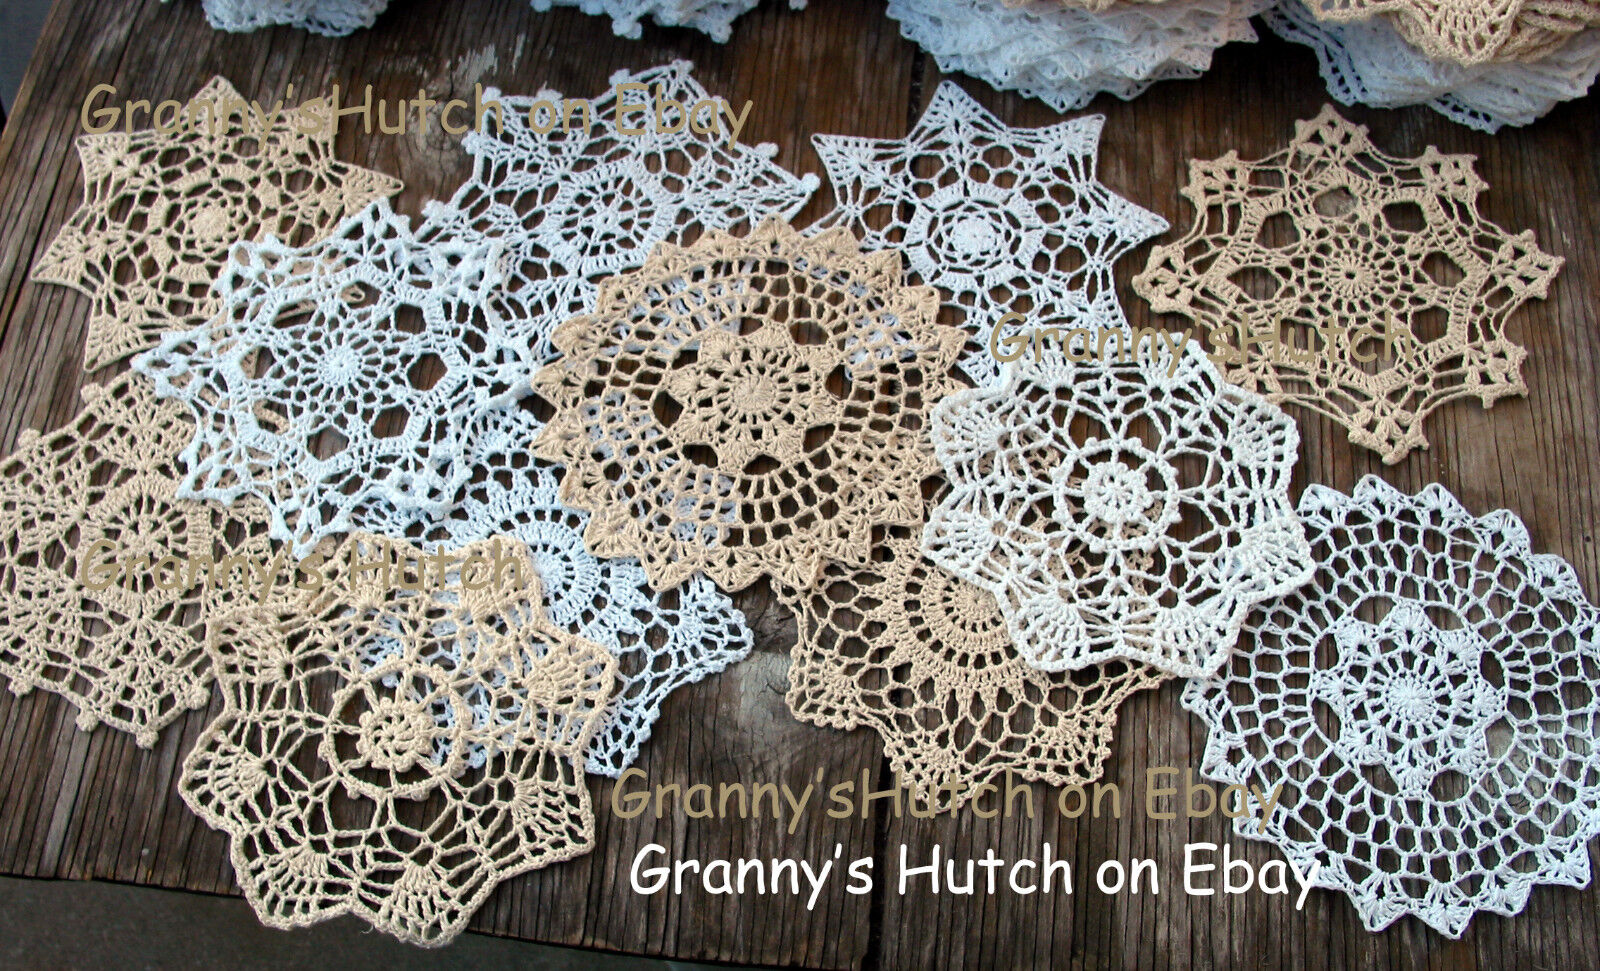  lot of 12 Hand Crochet Doilies 7" White & Natural Vintage Wedding Tea Party NEW Без бренда